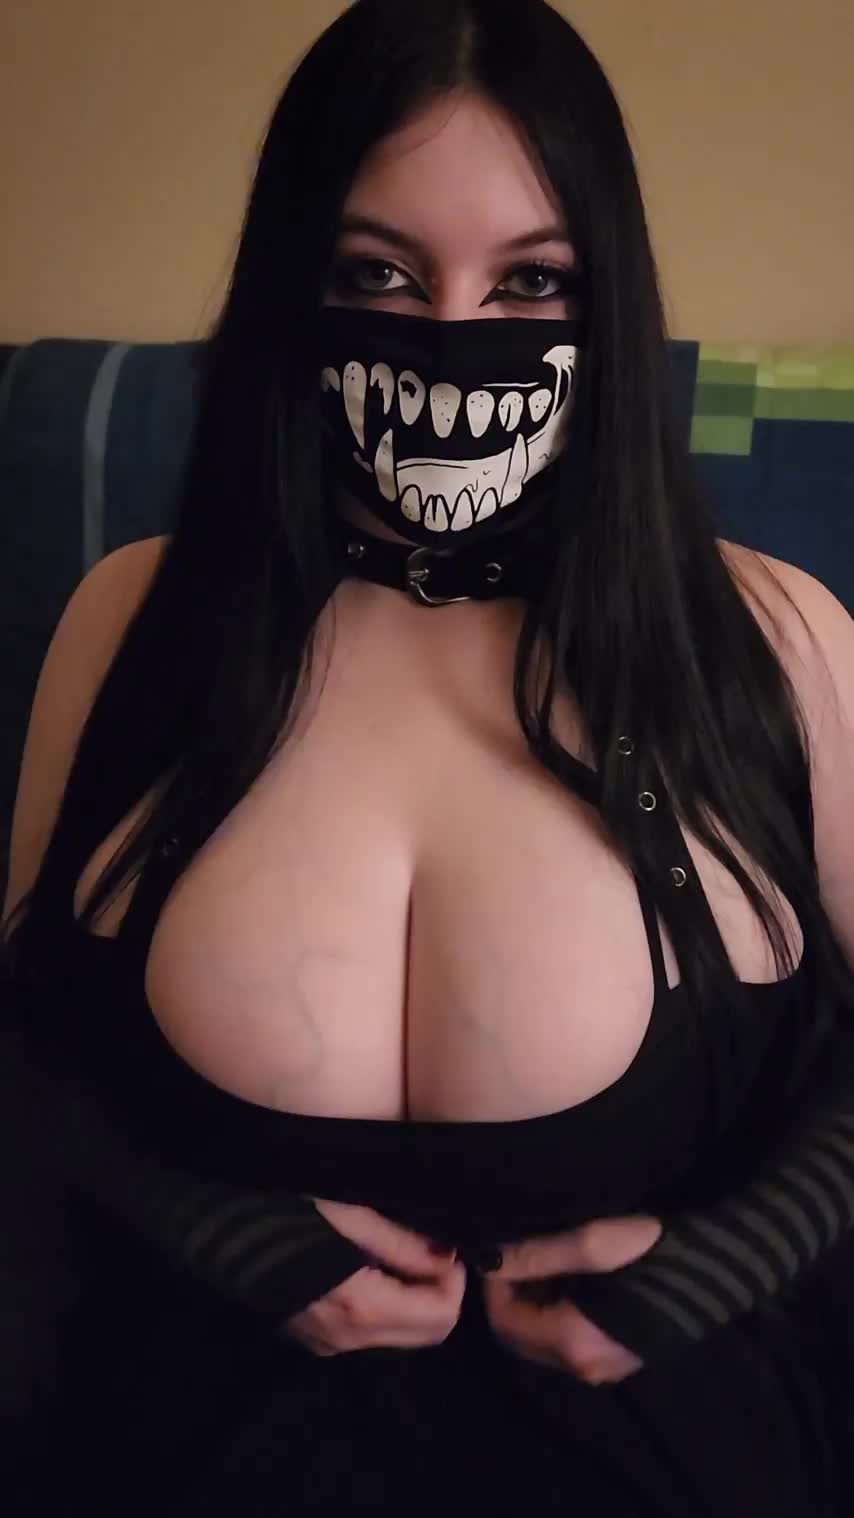 tiddy dropping and jiggling for you 🖤 : video clip